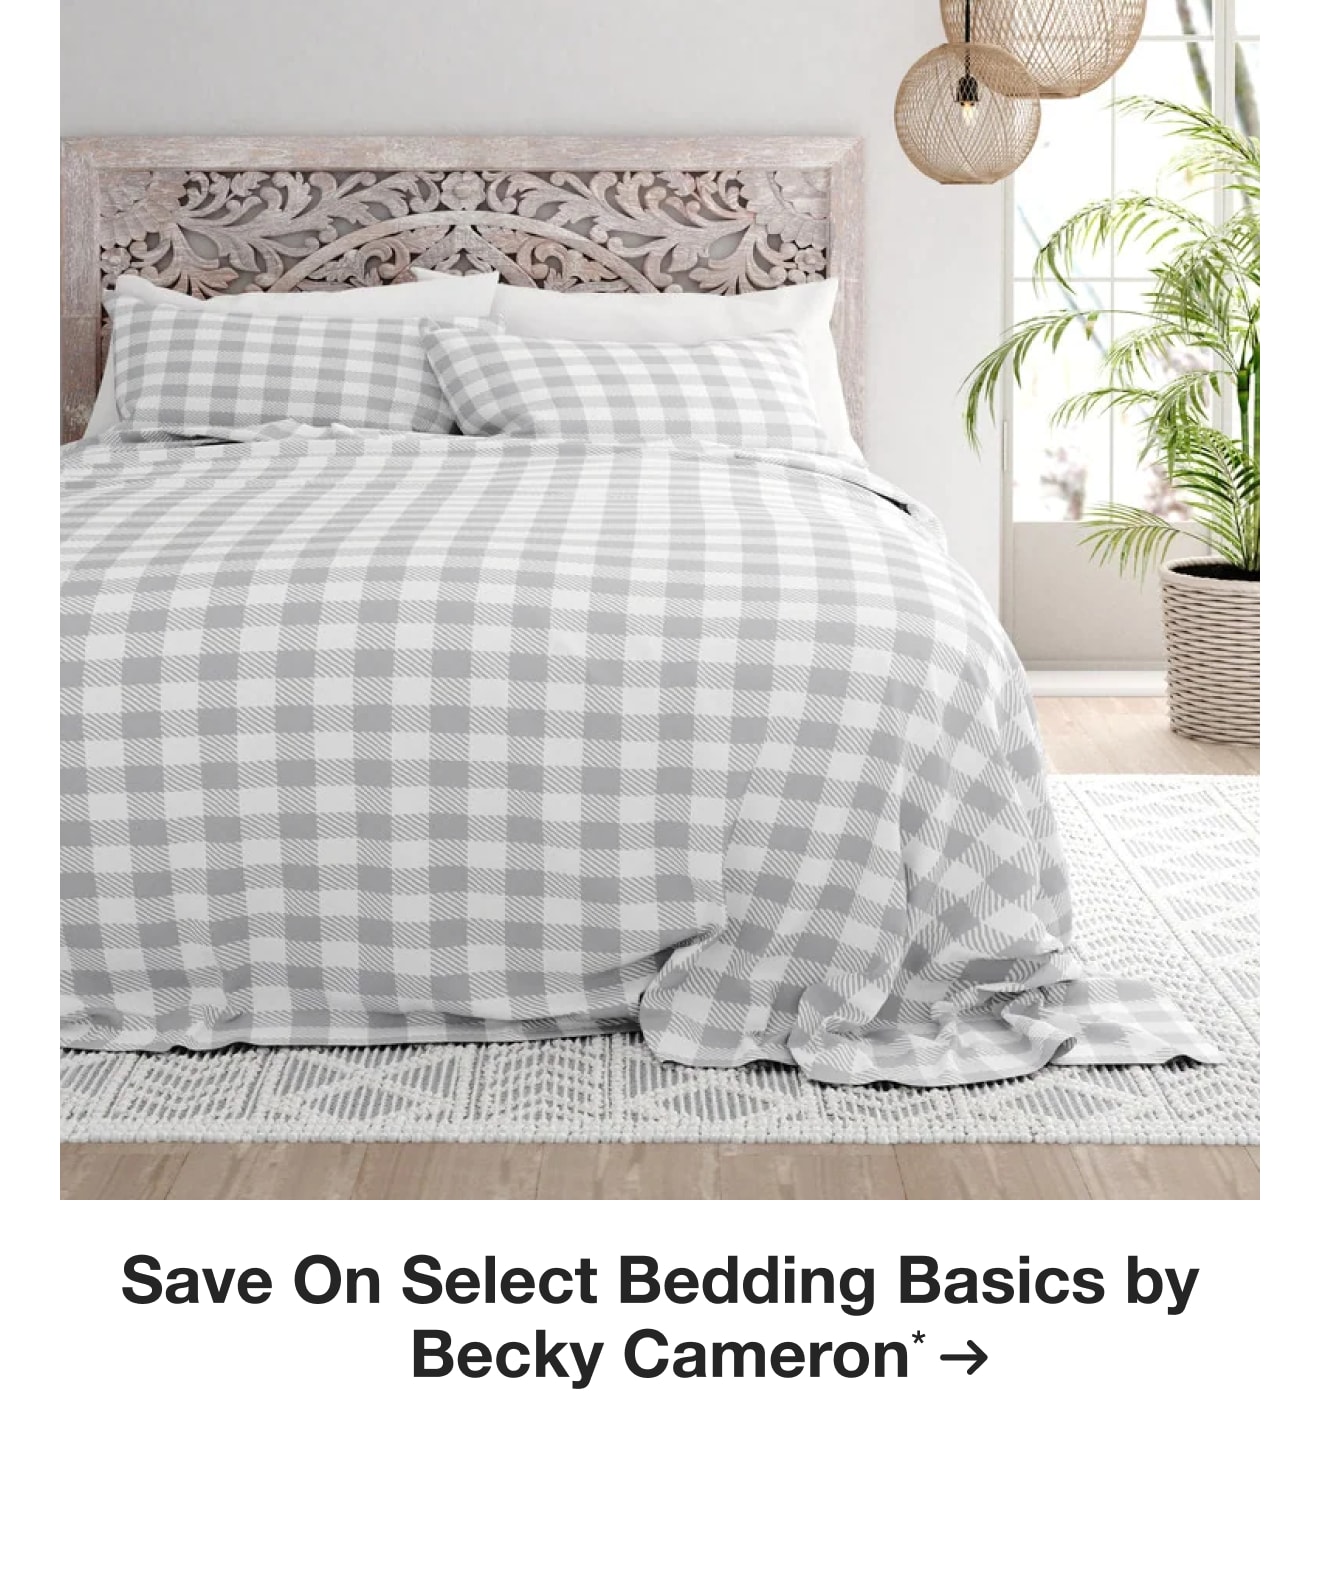 Save On Select Bedding Basics by Becky Cameron